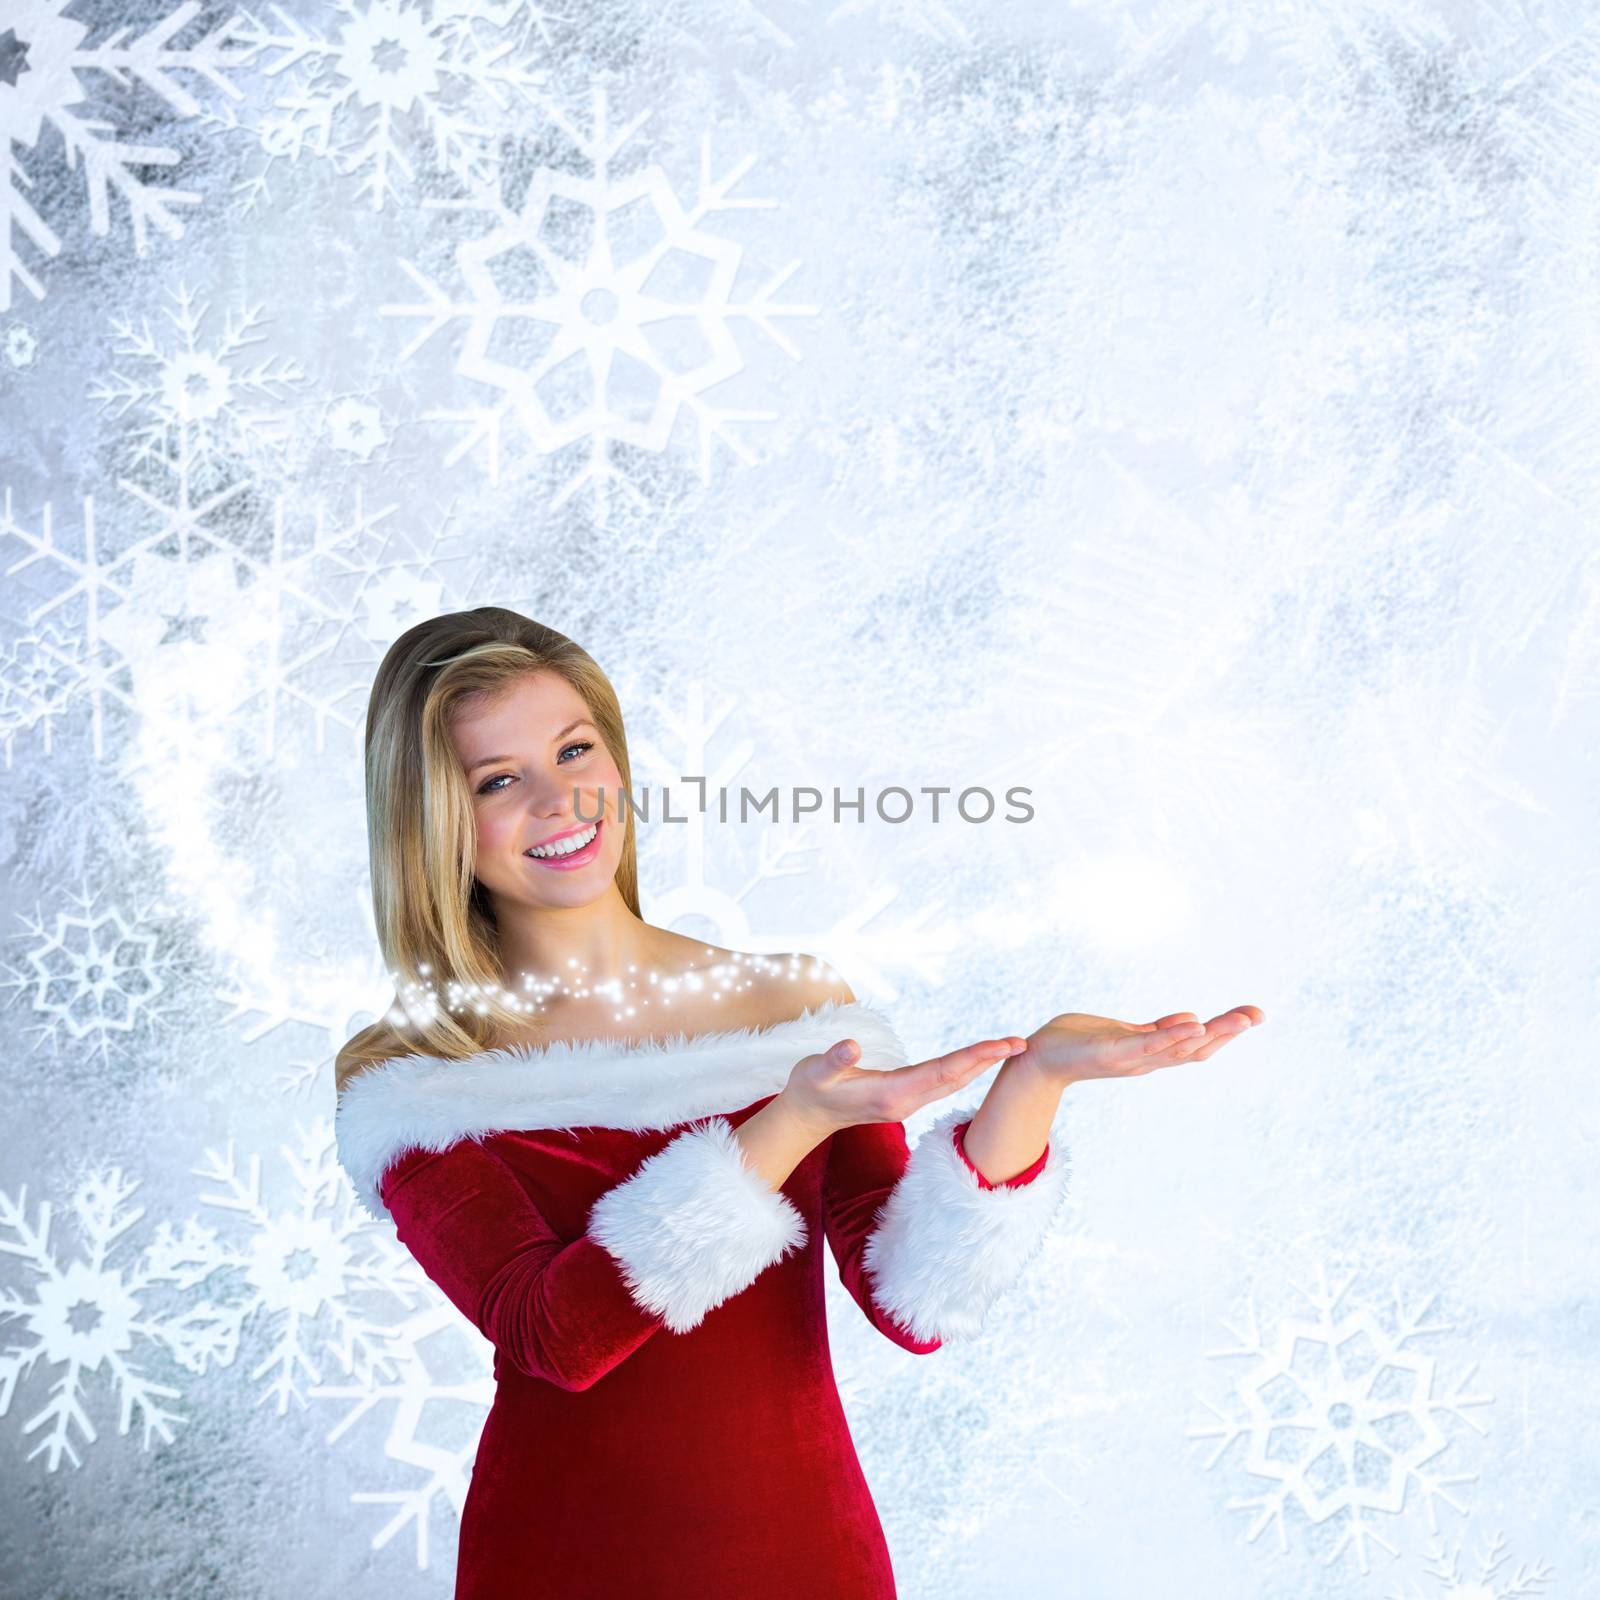 Pretty girl presenting in santa outfit against silver snow flake pattern design